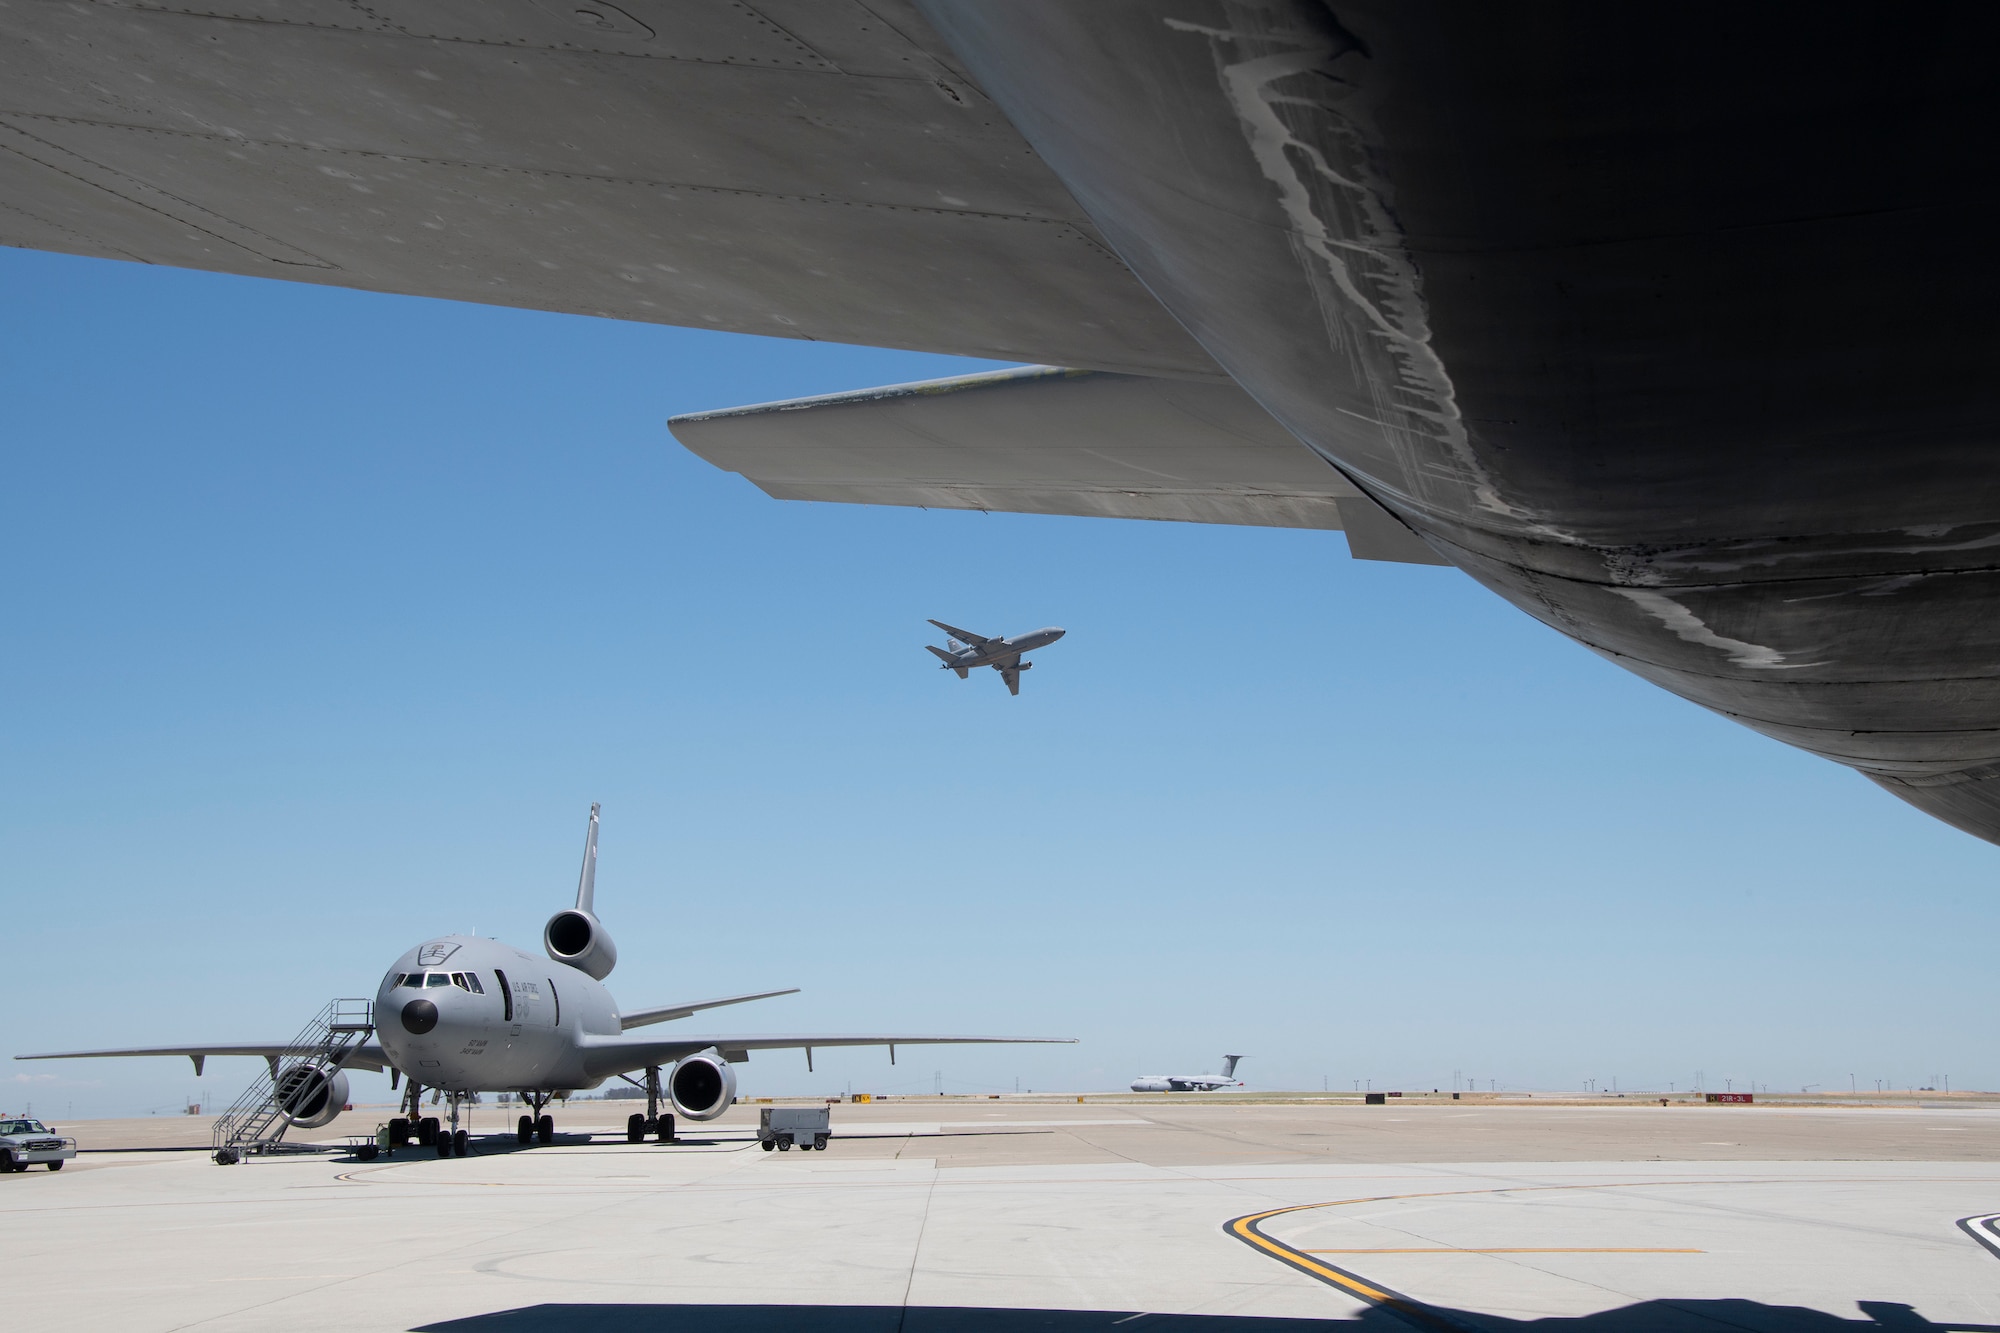 U.S. Air Force KC-10 Extender rests on the flight line July 11, 2019 at Travis Air Force Base, California. Although the KC-l0’s primary mission is aerial refueling, it can combine the tasks of a tanker and cargo aircraft by refueling fighters while simultaneously carrying support personnel and equipment. (U.S. Air Force photo by Heide Couch)